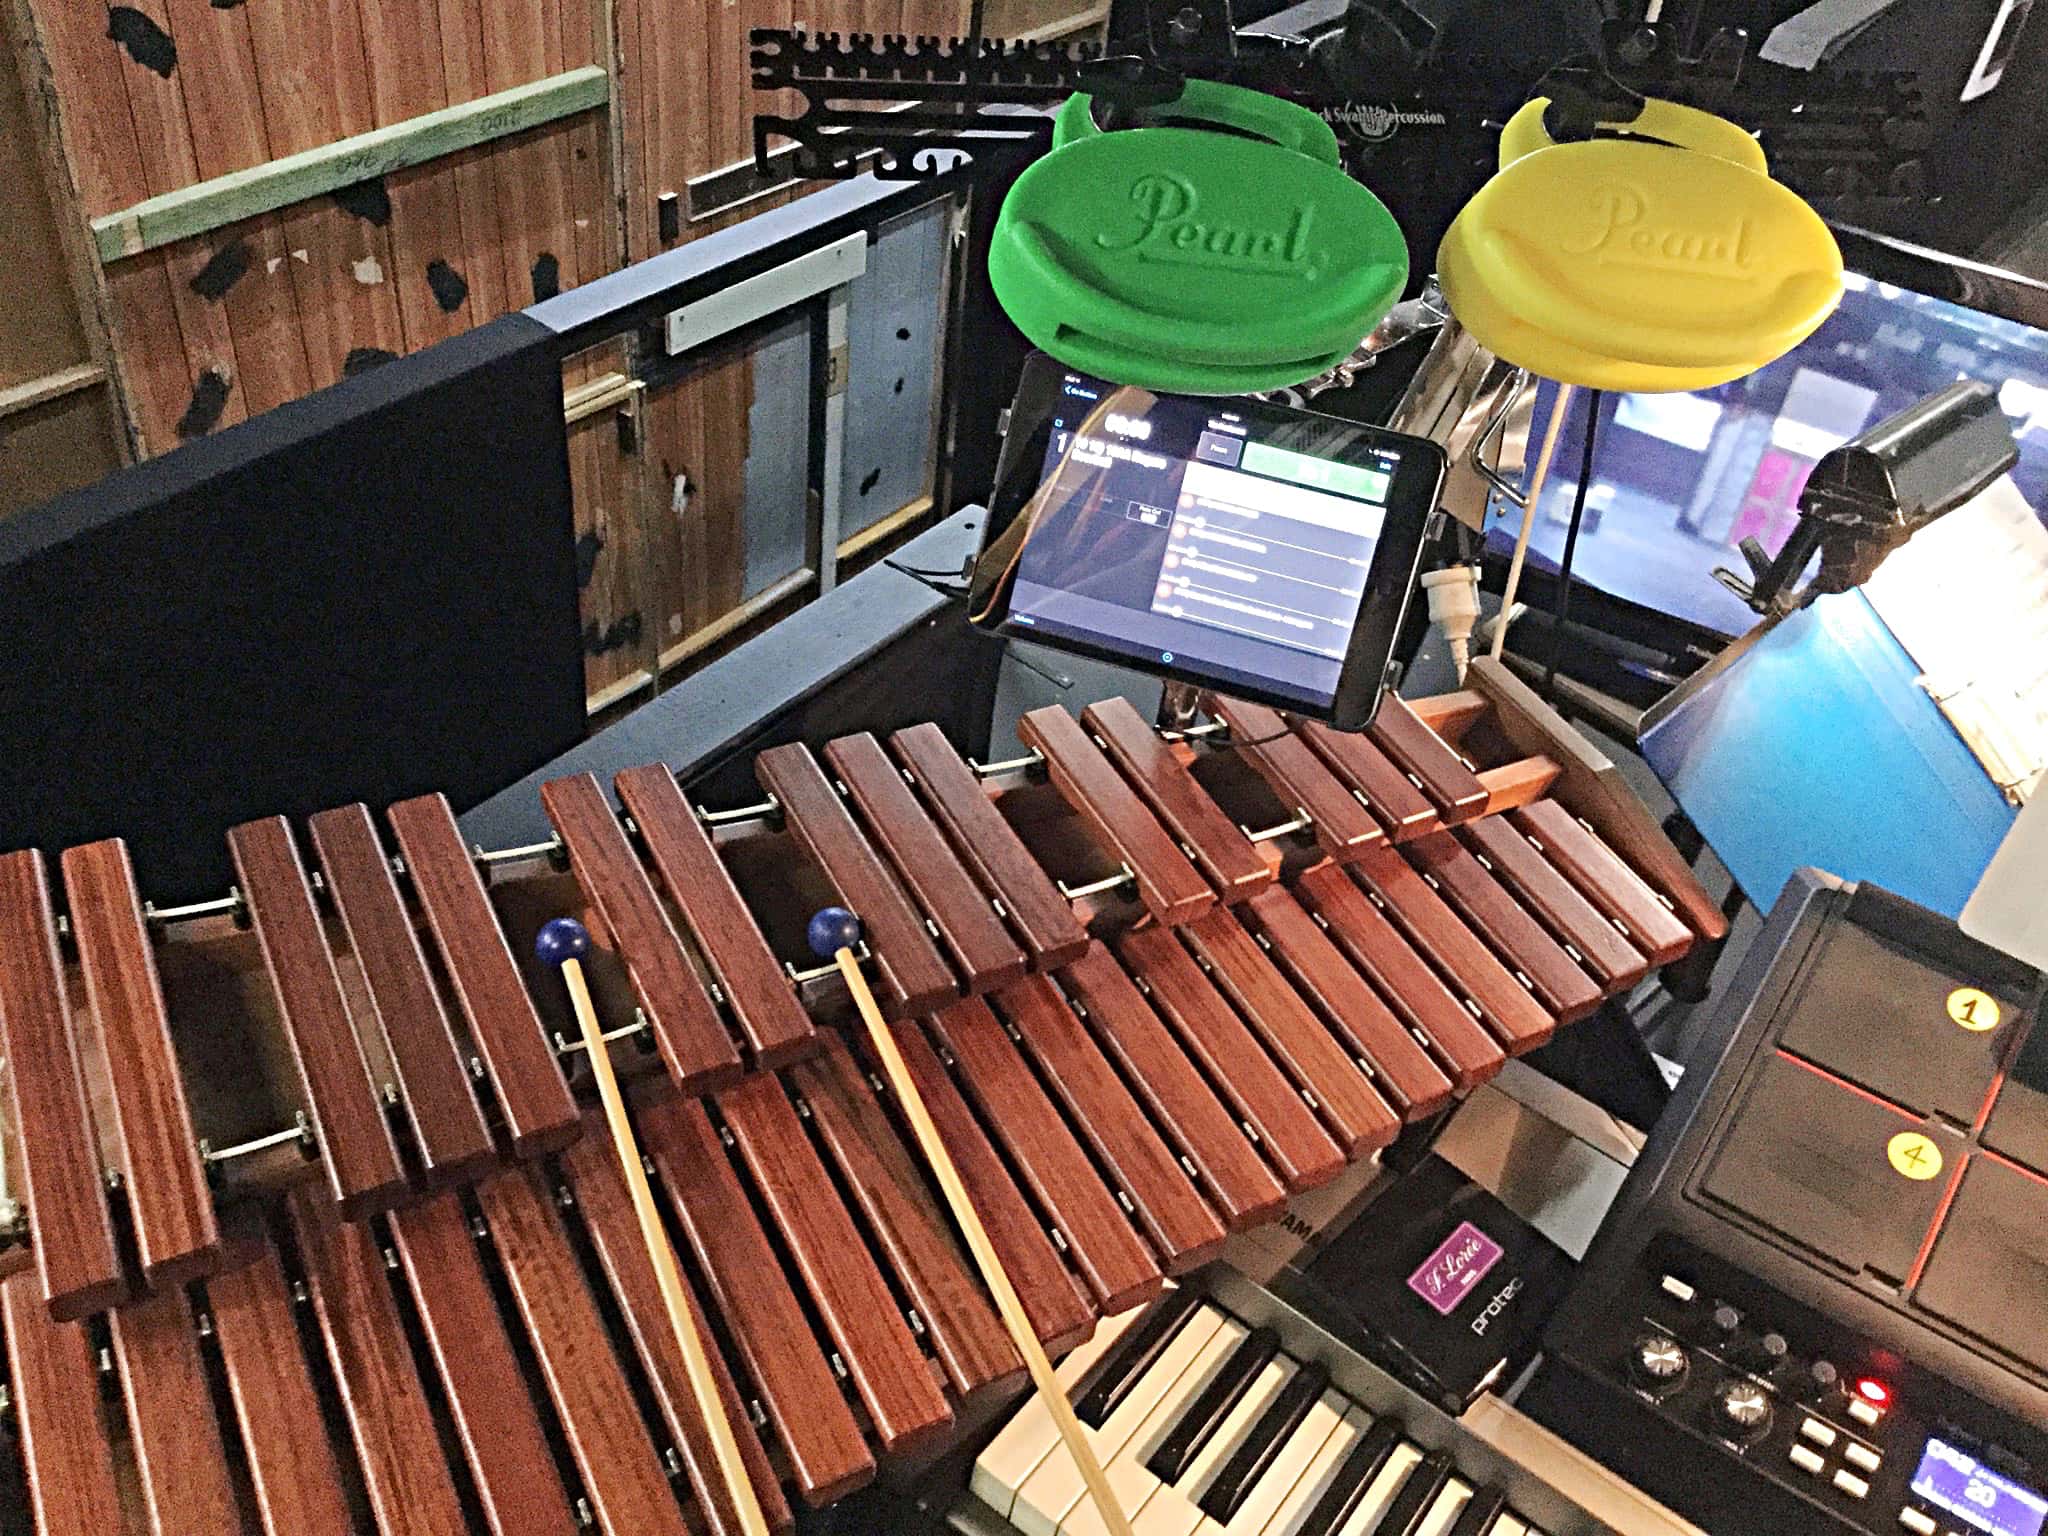 Lindsay Kaul’s percussion setup for The Producers at The Players Theater in Port Macquarie in New South Wales, Australia.